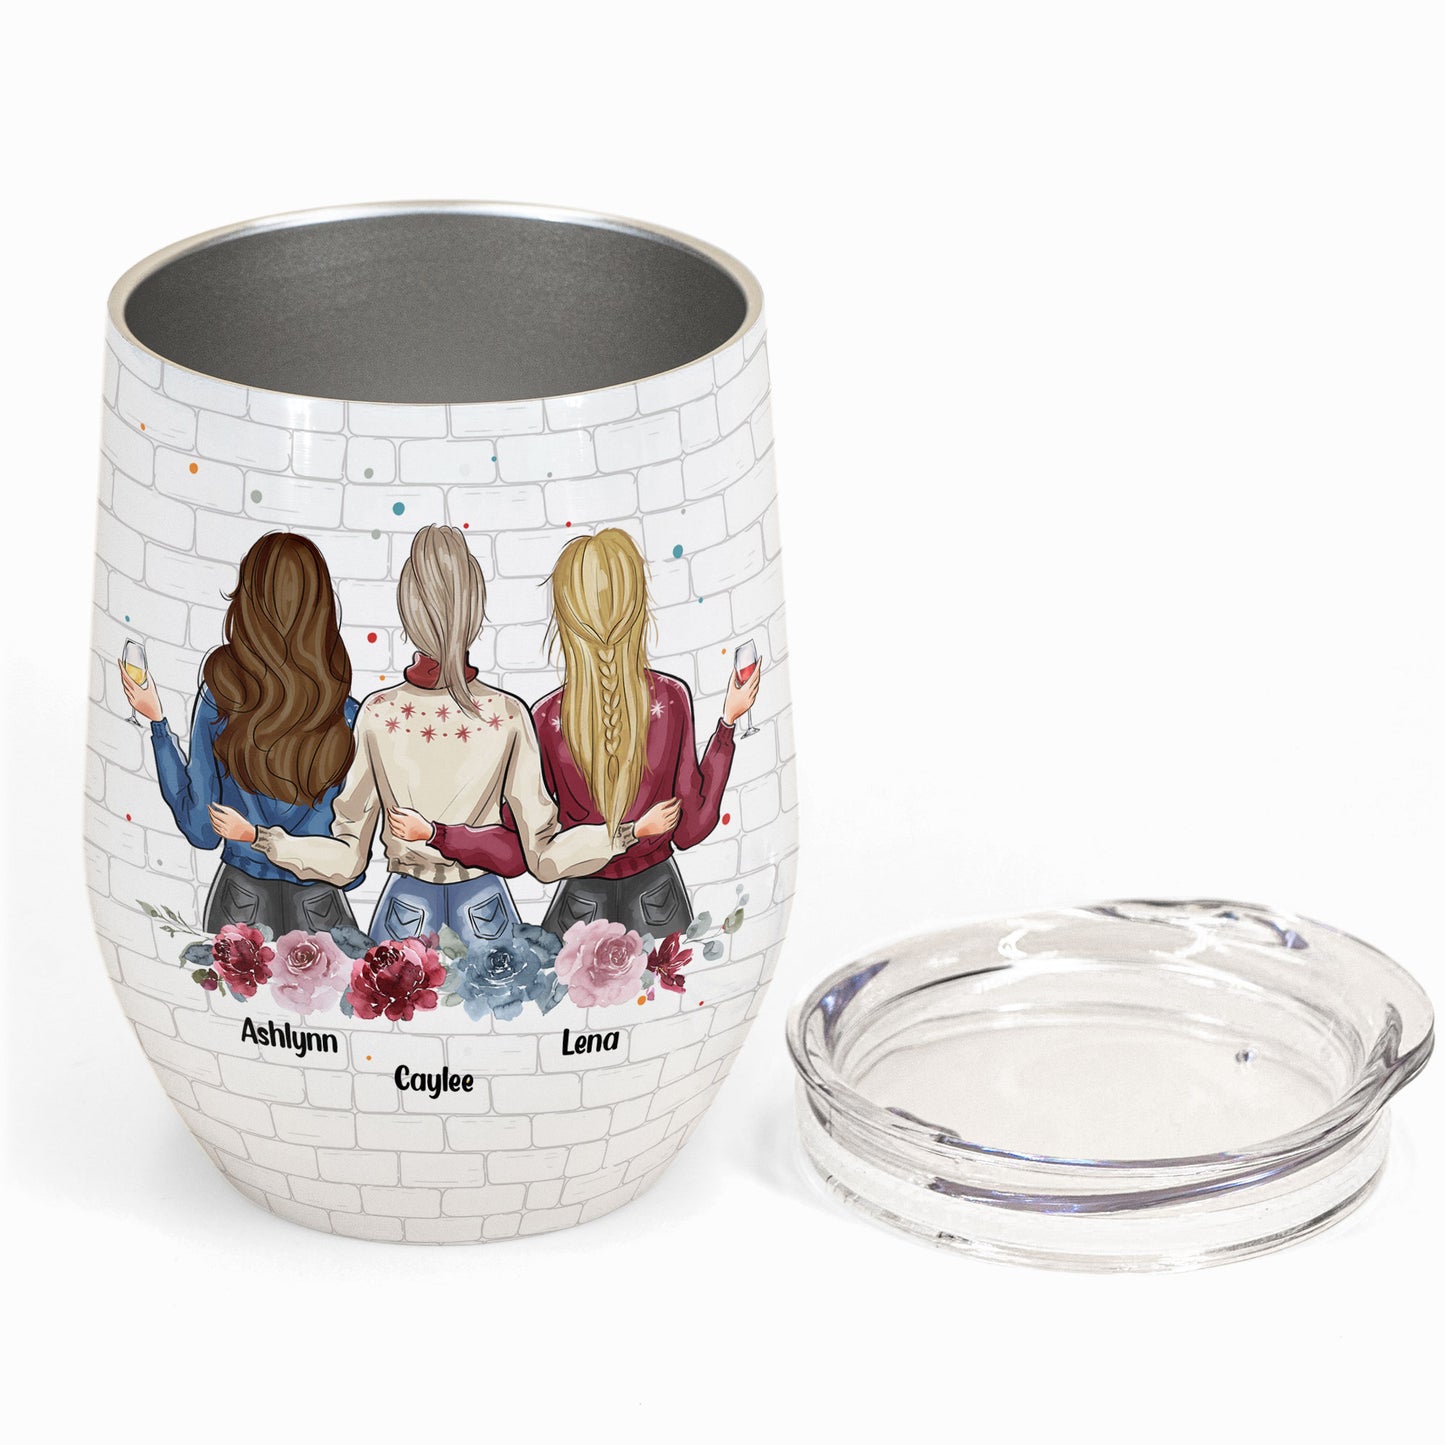 Another Year Of Bonding Over Alcohol - Personalized Wine Tumbler - Funny Birthday Christmas Gift For Besties, Sisters, Sistas